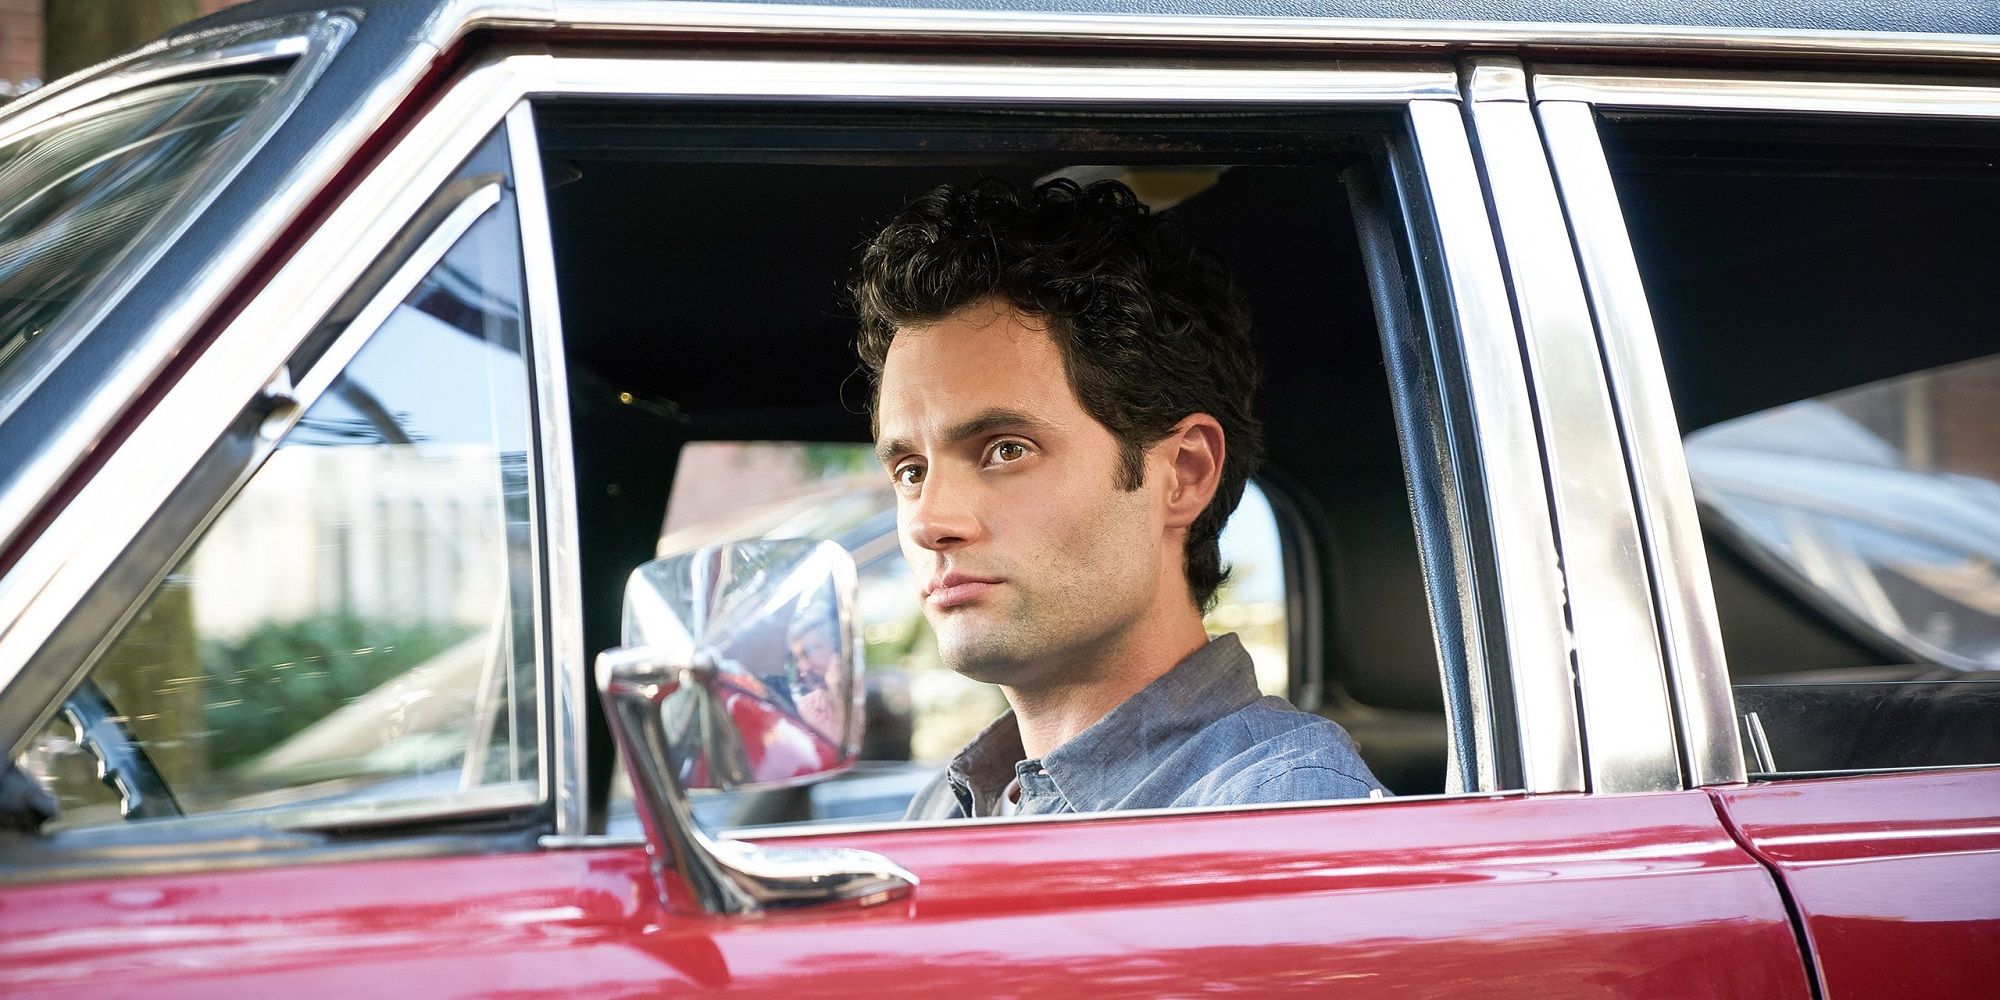 Joe sitting in a red car in a scene from You, looking out the window.